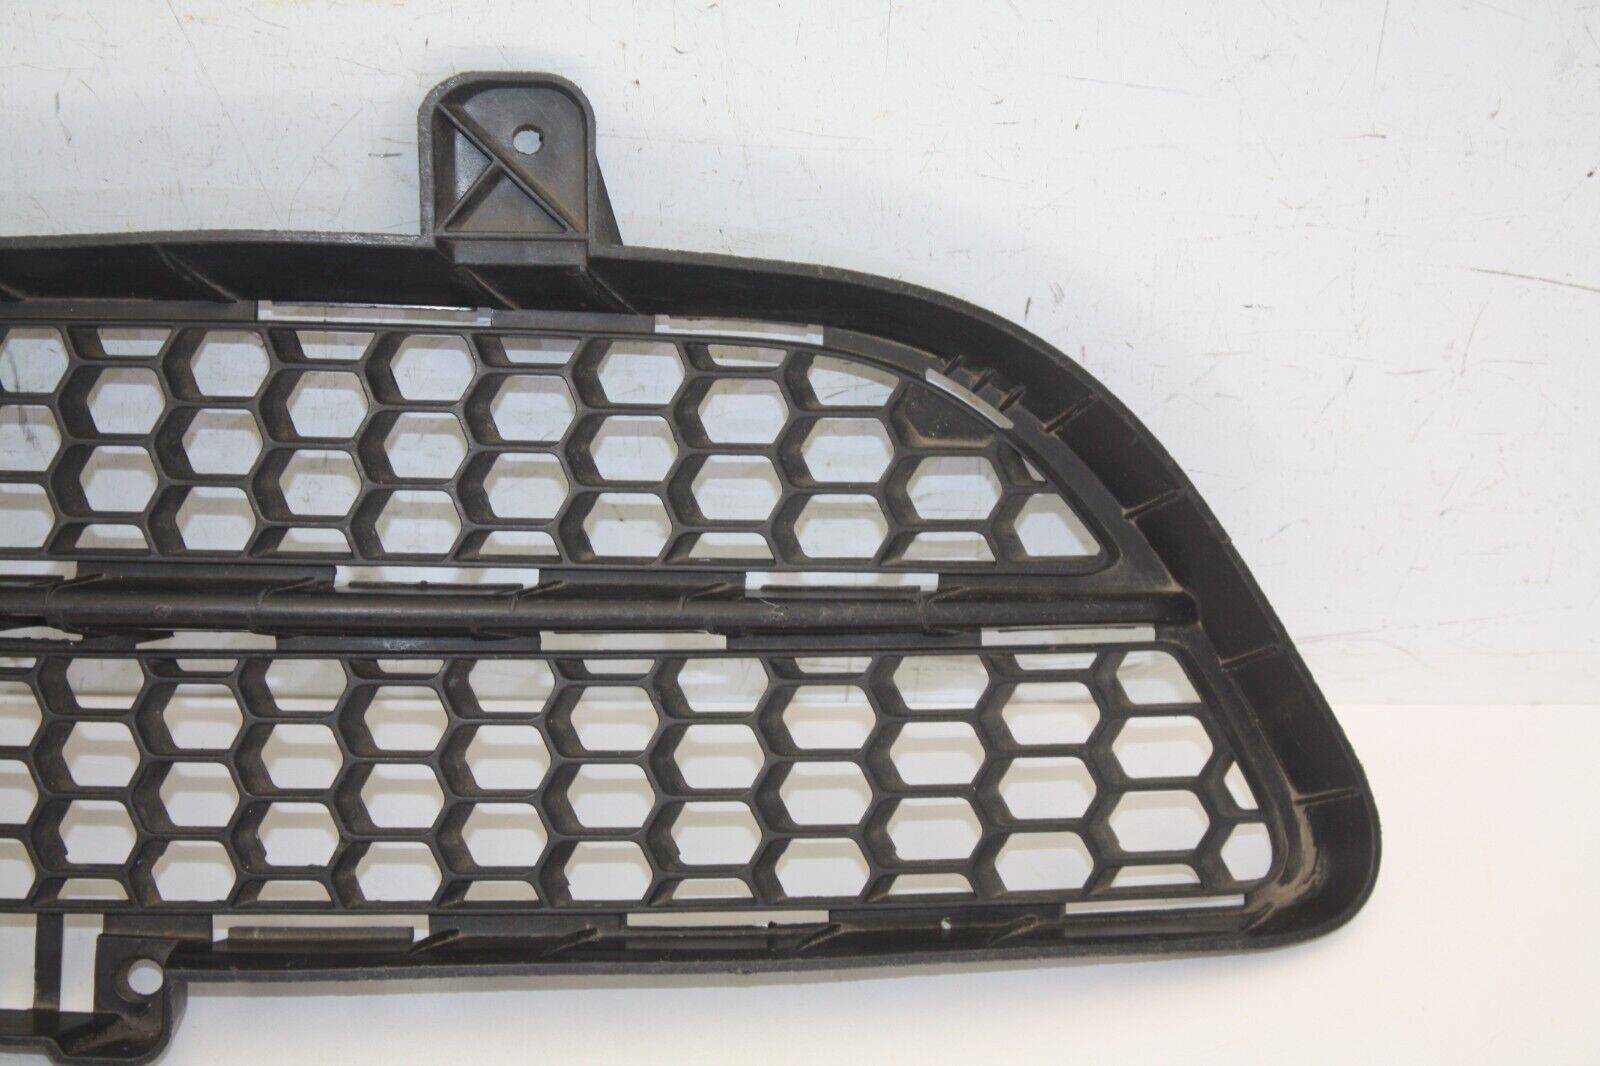 VW-Touareg-Front-Bumper-Right-Grill-2007-TO-2010-7L6853666B-Genuine-176241219097-2